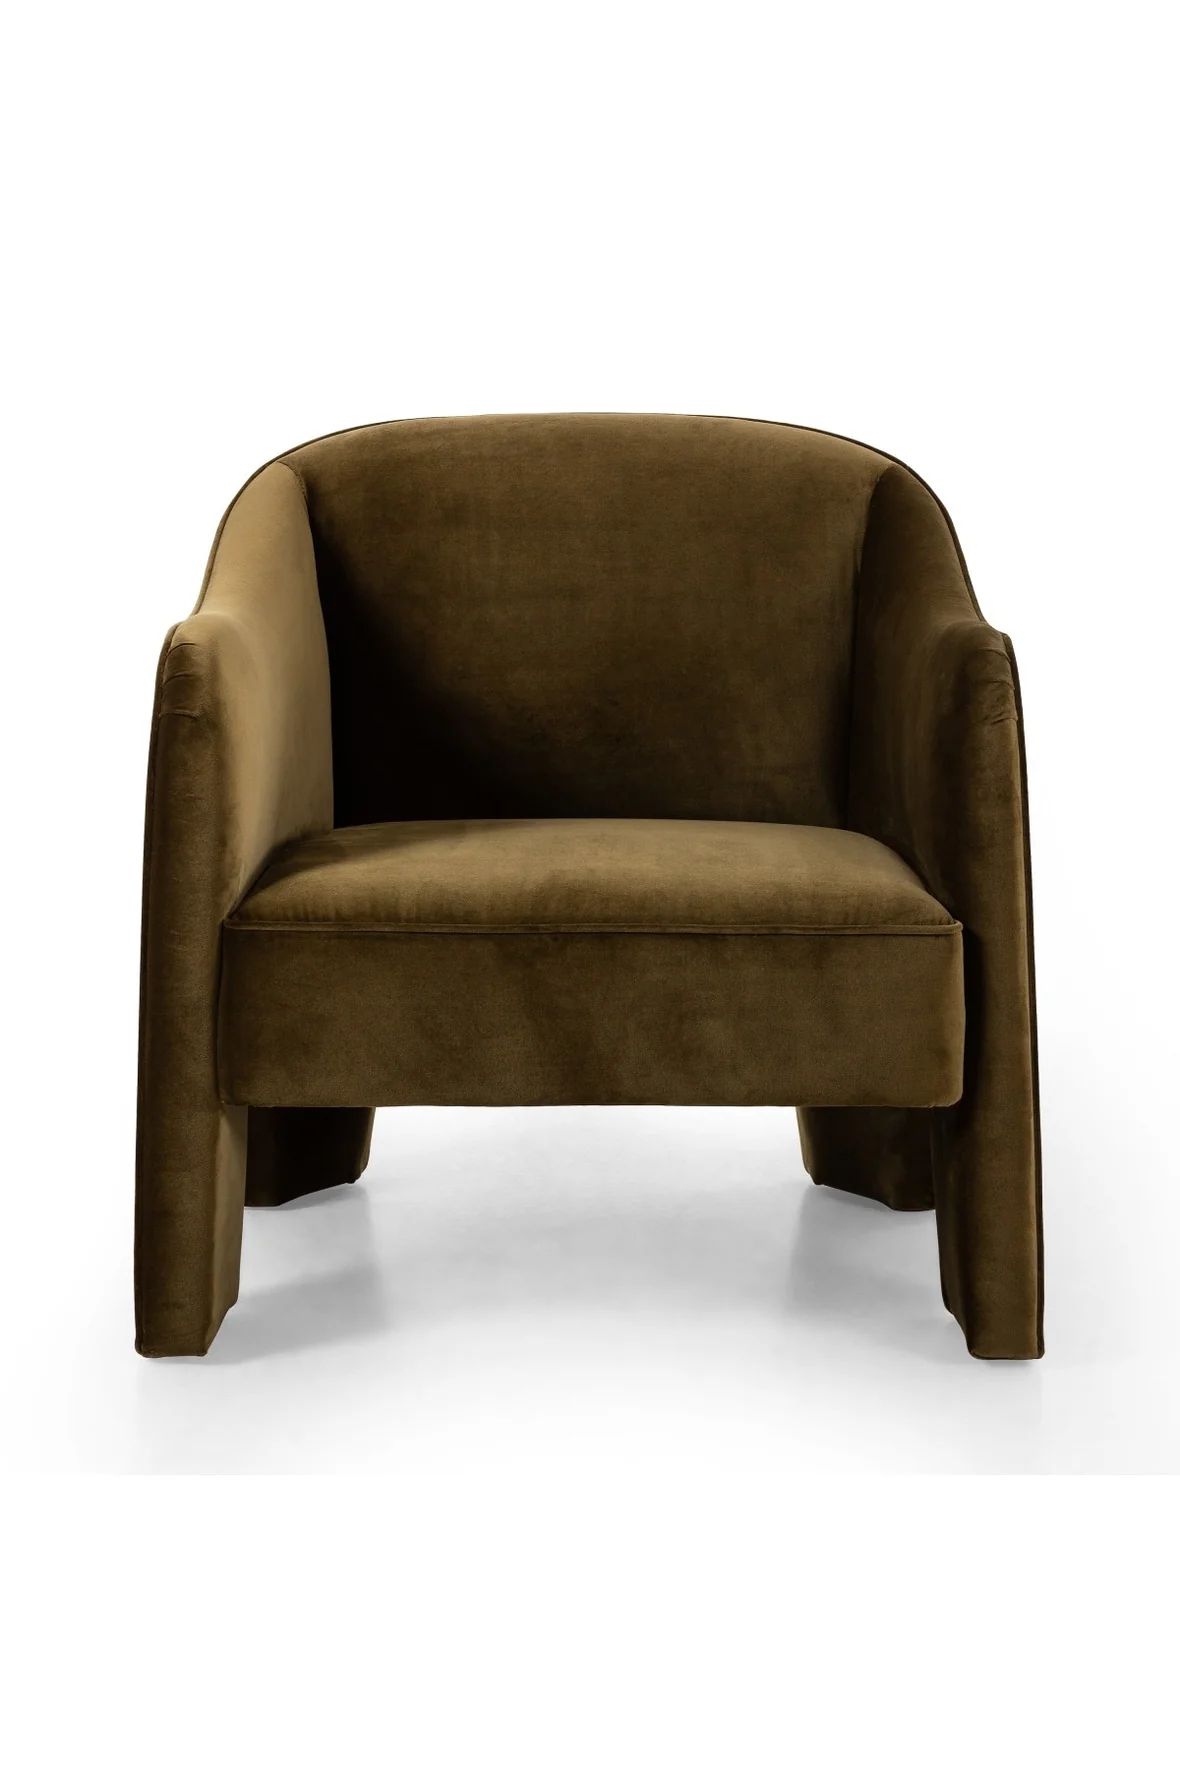 Cardwell Chair - Surrey Moss | THELIFESTYLEDCO